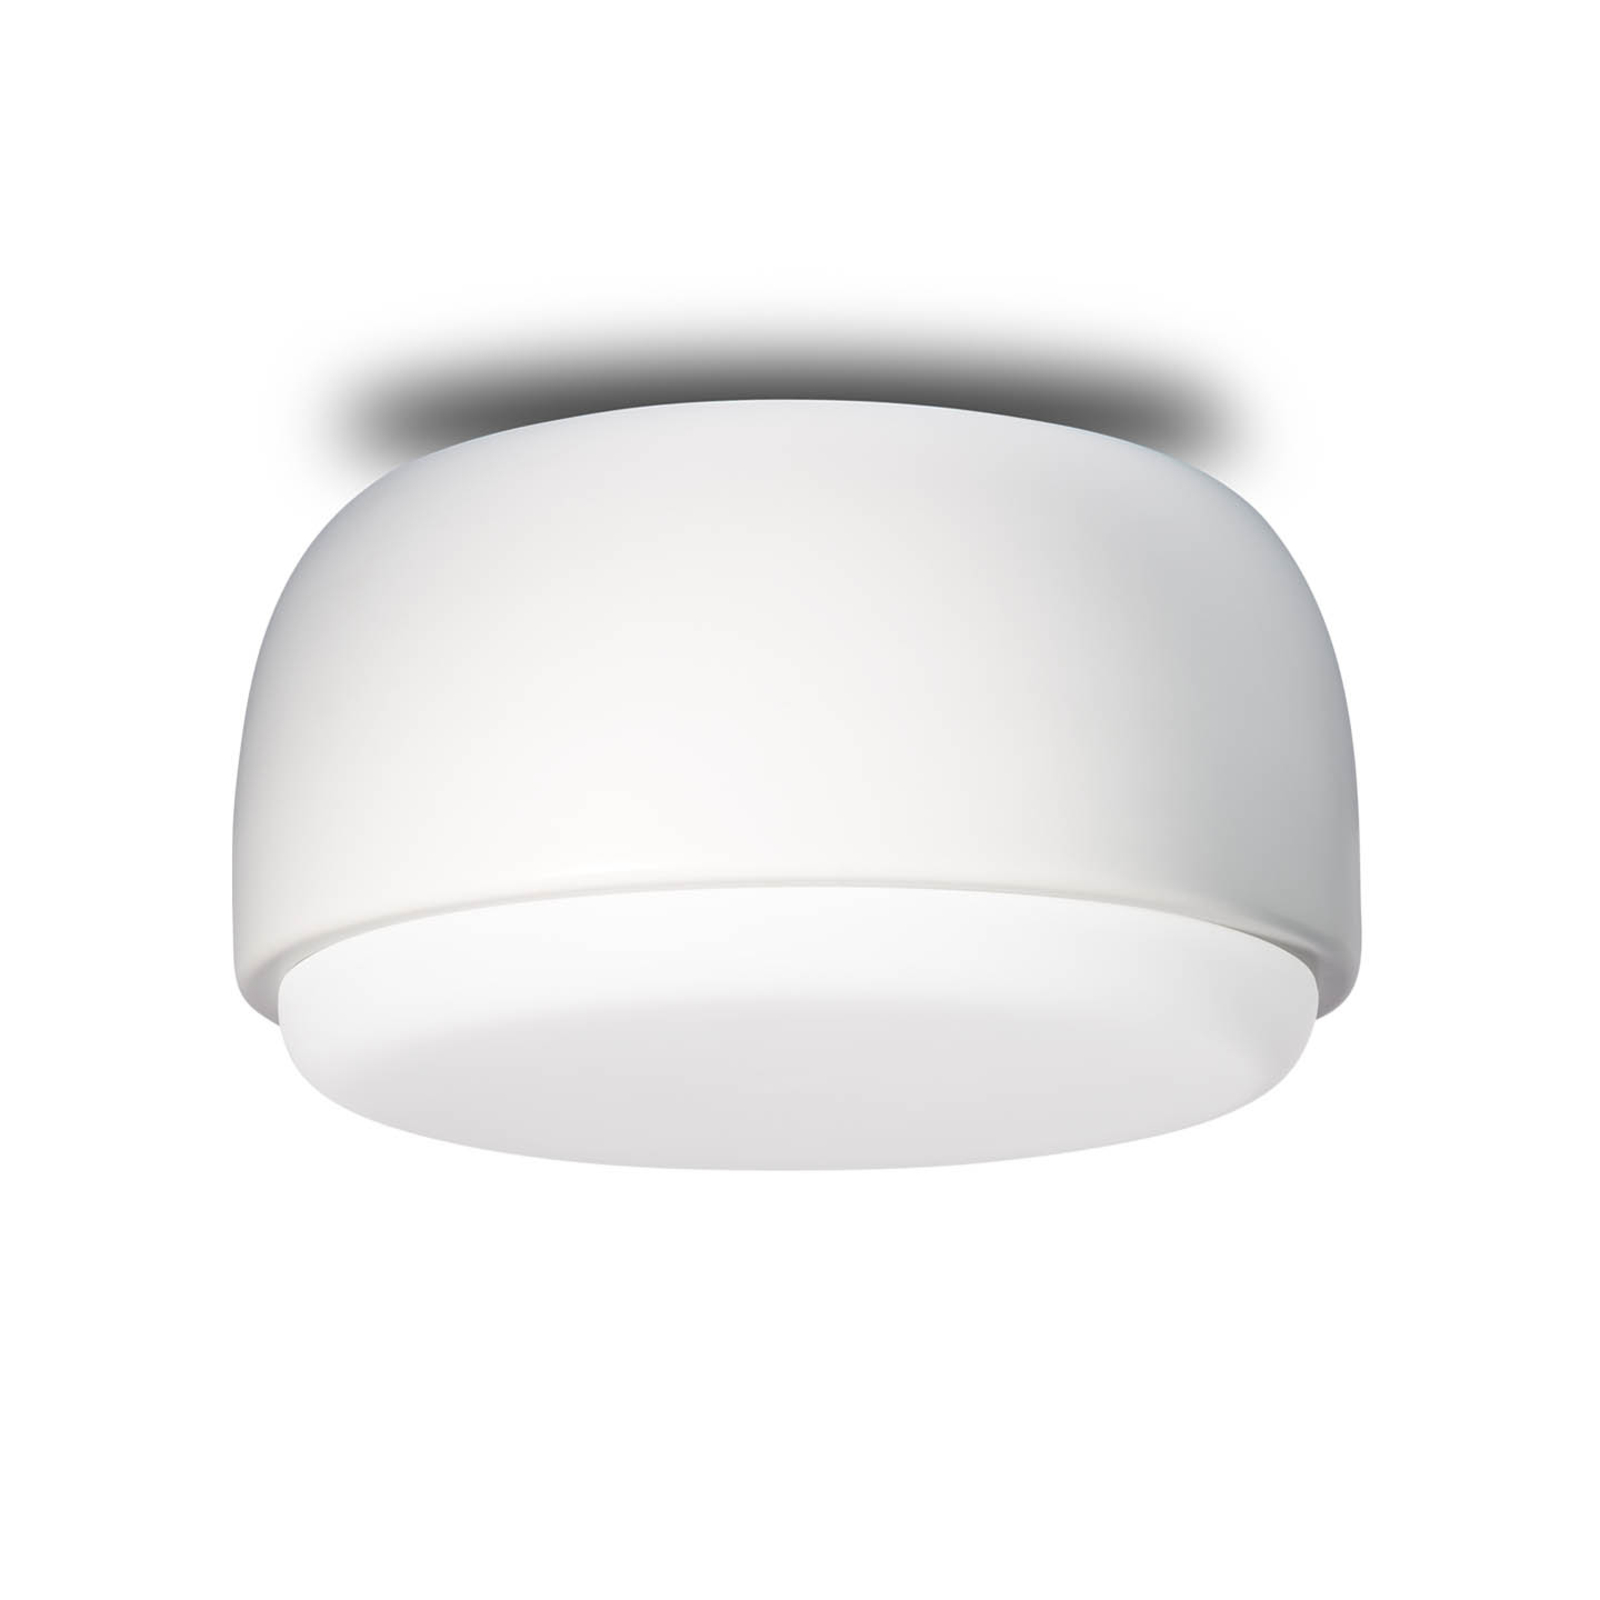 Northern Over Me ceiling light white 20 cm